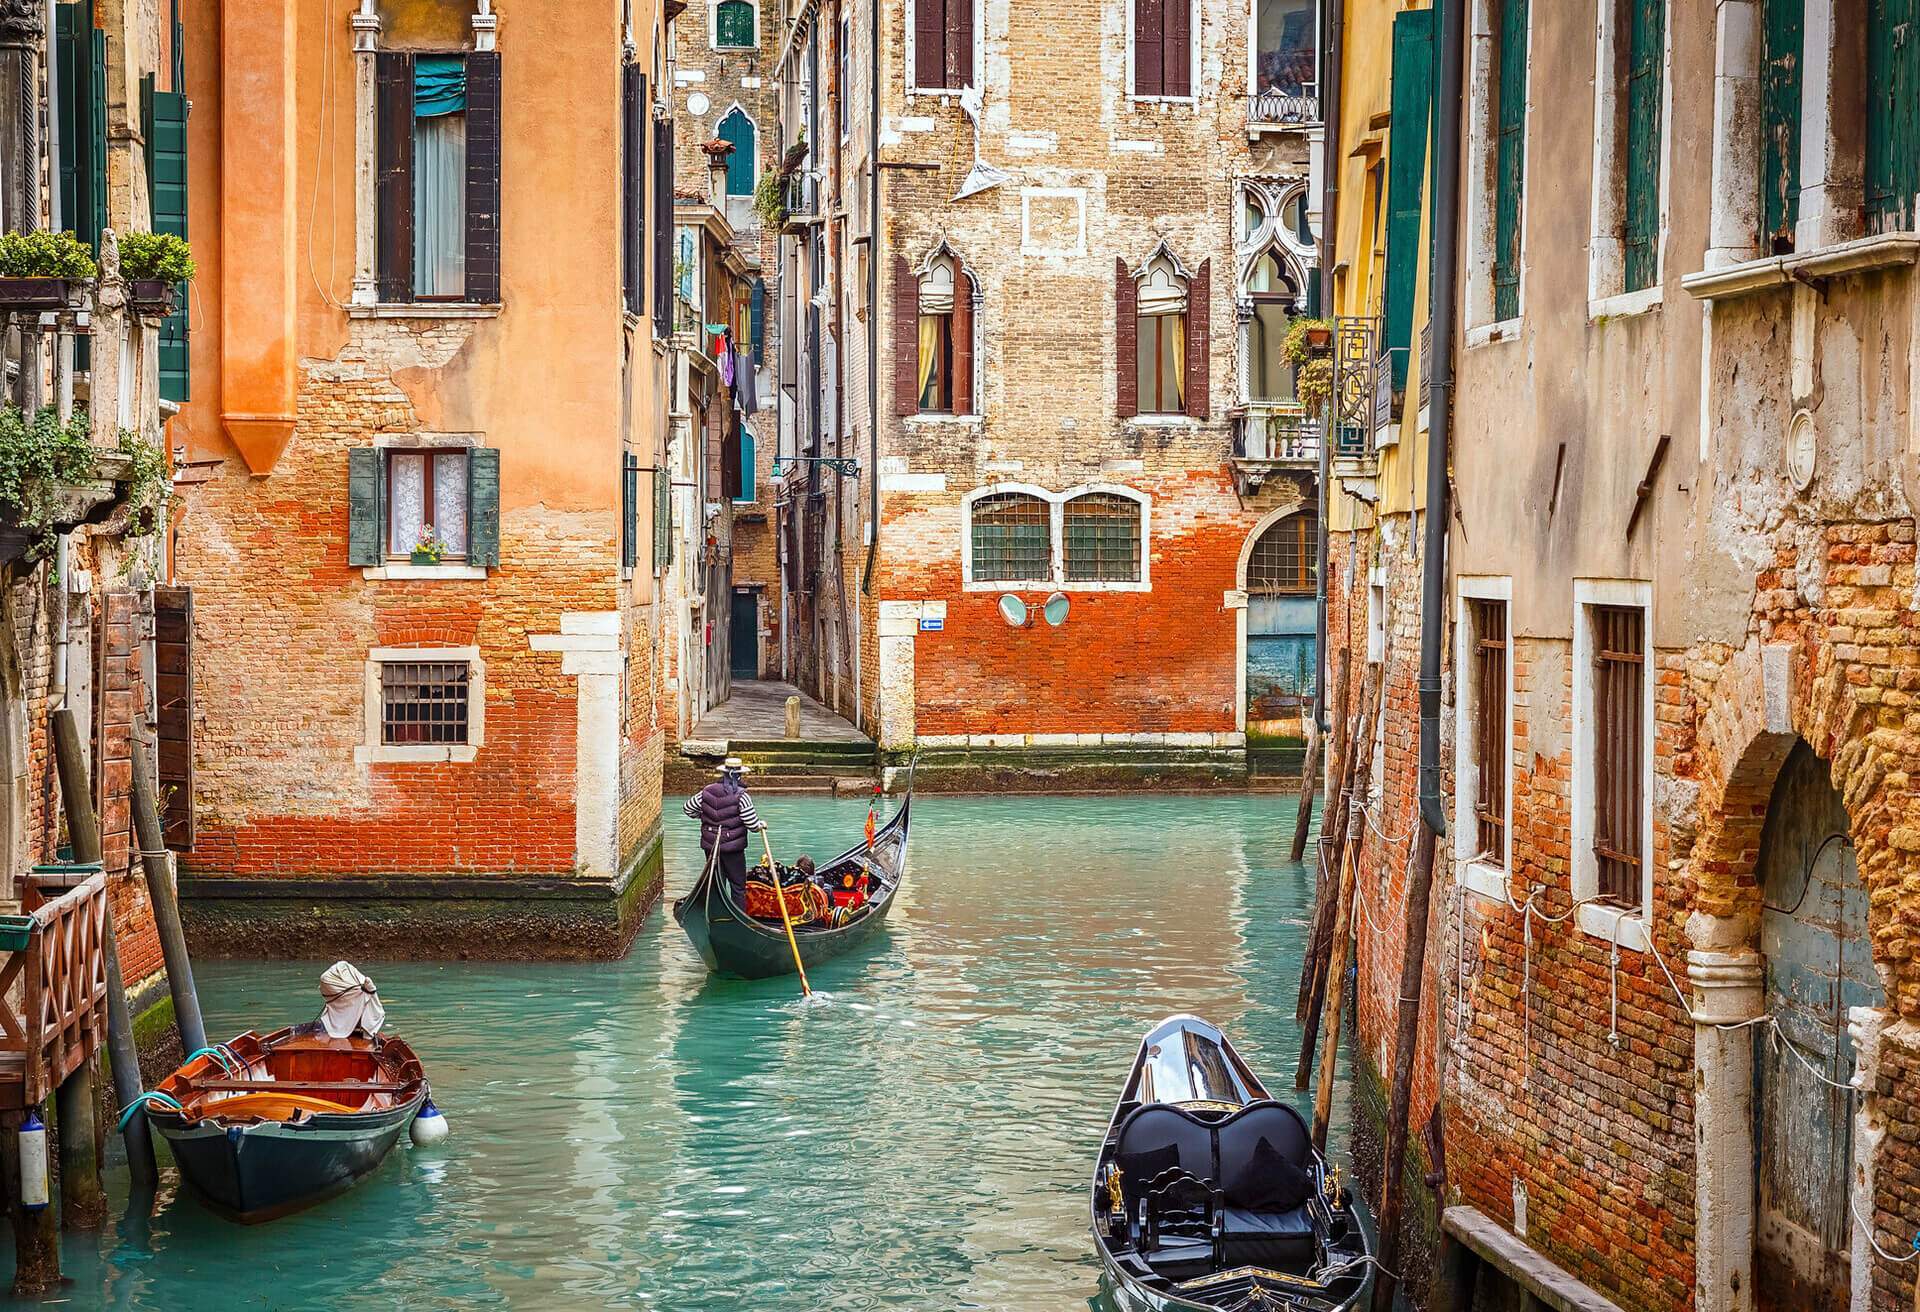 dest_italy_venice_gettyimages_516649272_universal_within-usage-period_23427-1.jpg